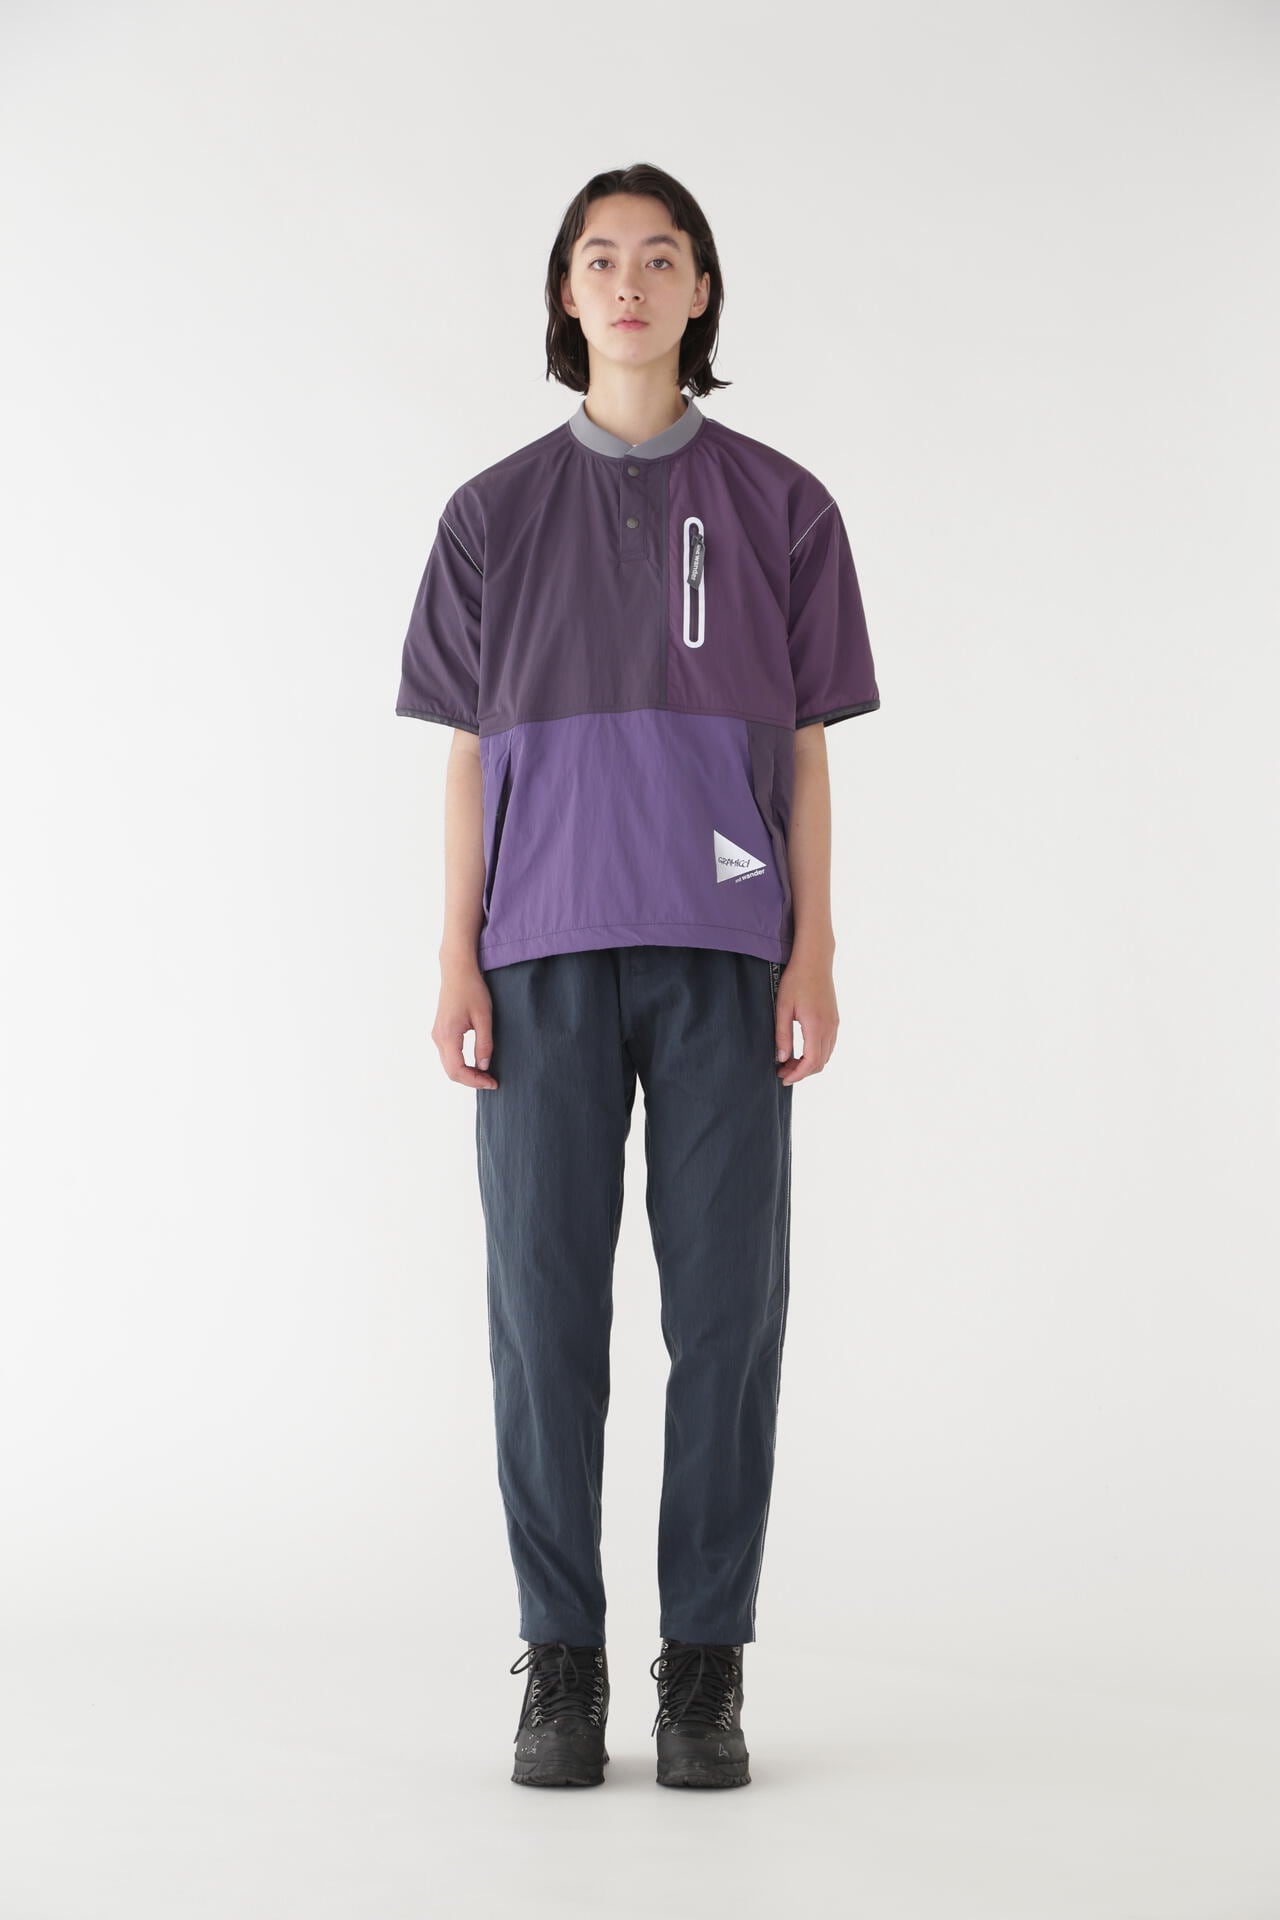 GRAMICCI × and wander PATCHWORK WIND TEE